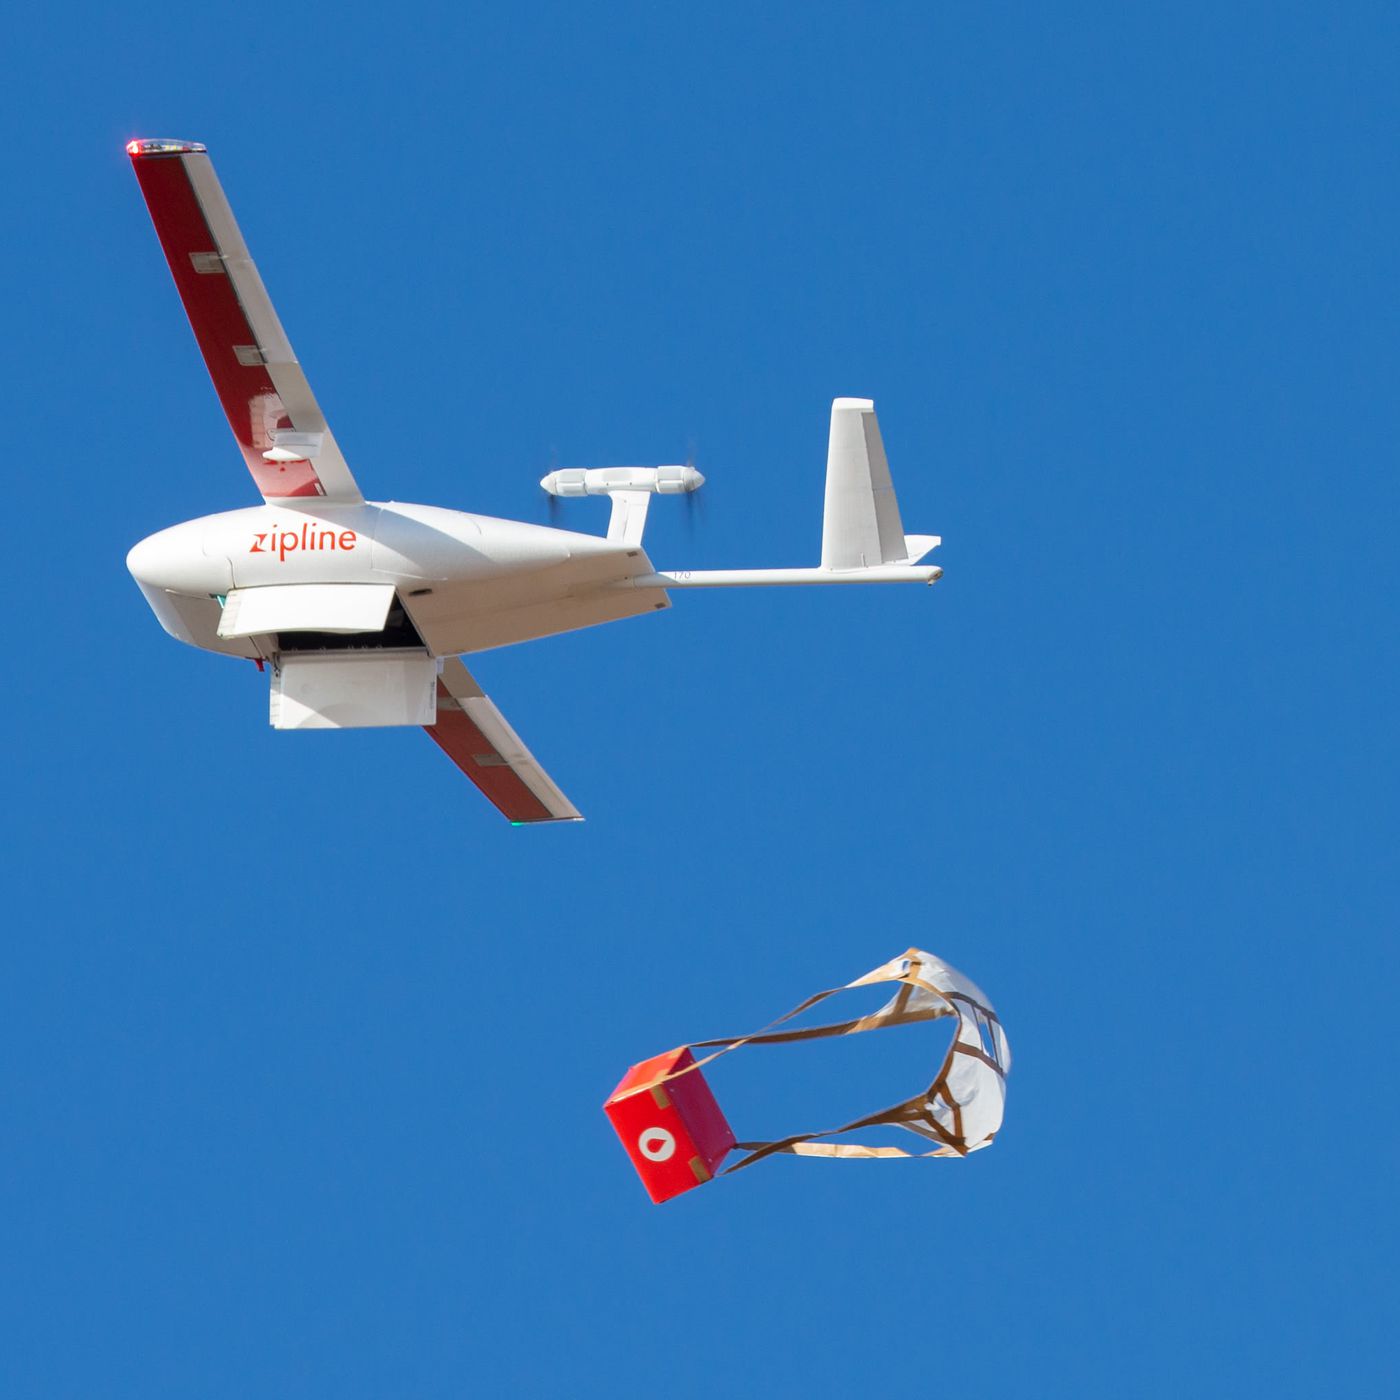 Zipline Drones can save Hospitals during Pandemic